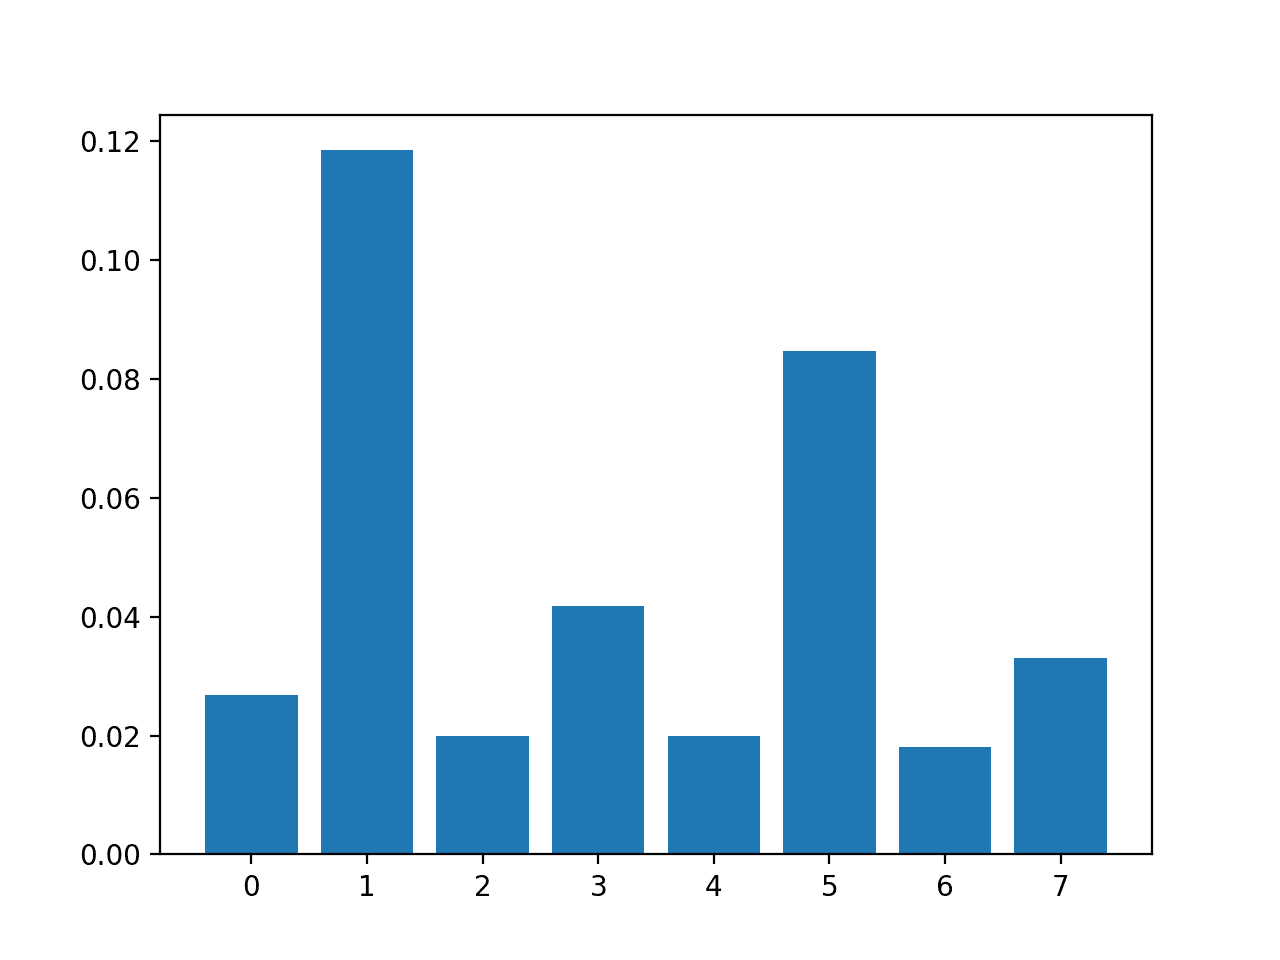 Bar Chart of the Input Features (x) vs. the Mutual Information Feature Importance (y)